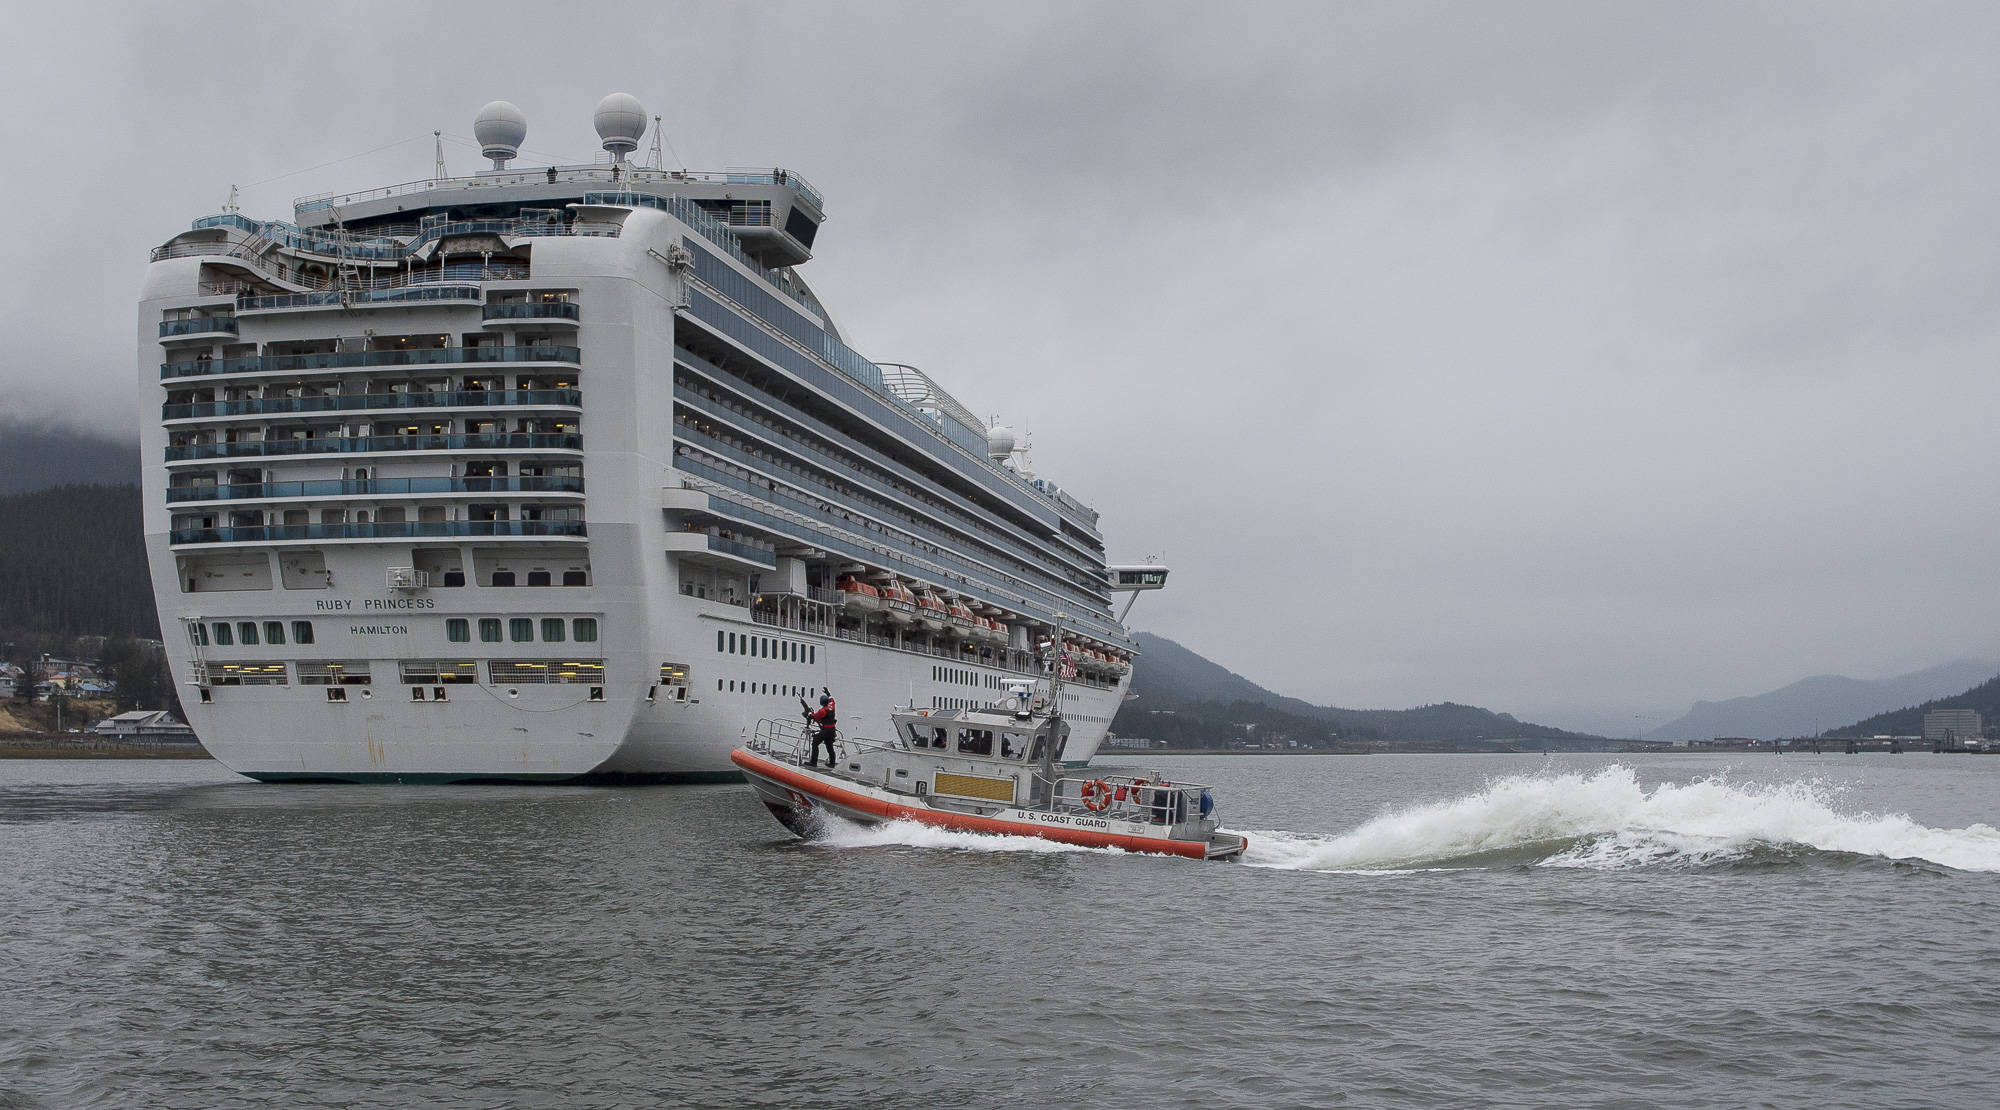 The Ruby Princess is escorted by a U.S. Coast Guard 45 foot Response Boat-Medium into Juneau downtown harbor on Monday, April 30, 2018. (Michael Penn | Juneau Empire)